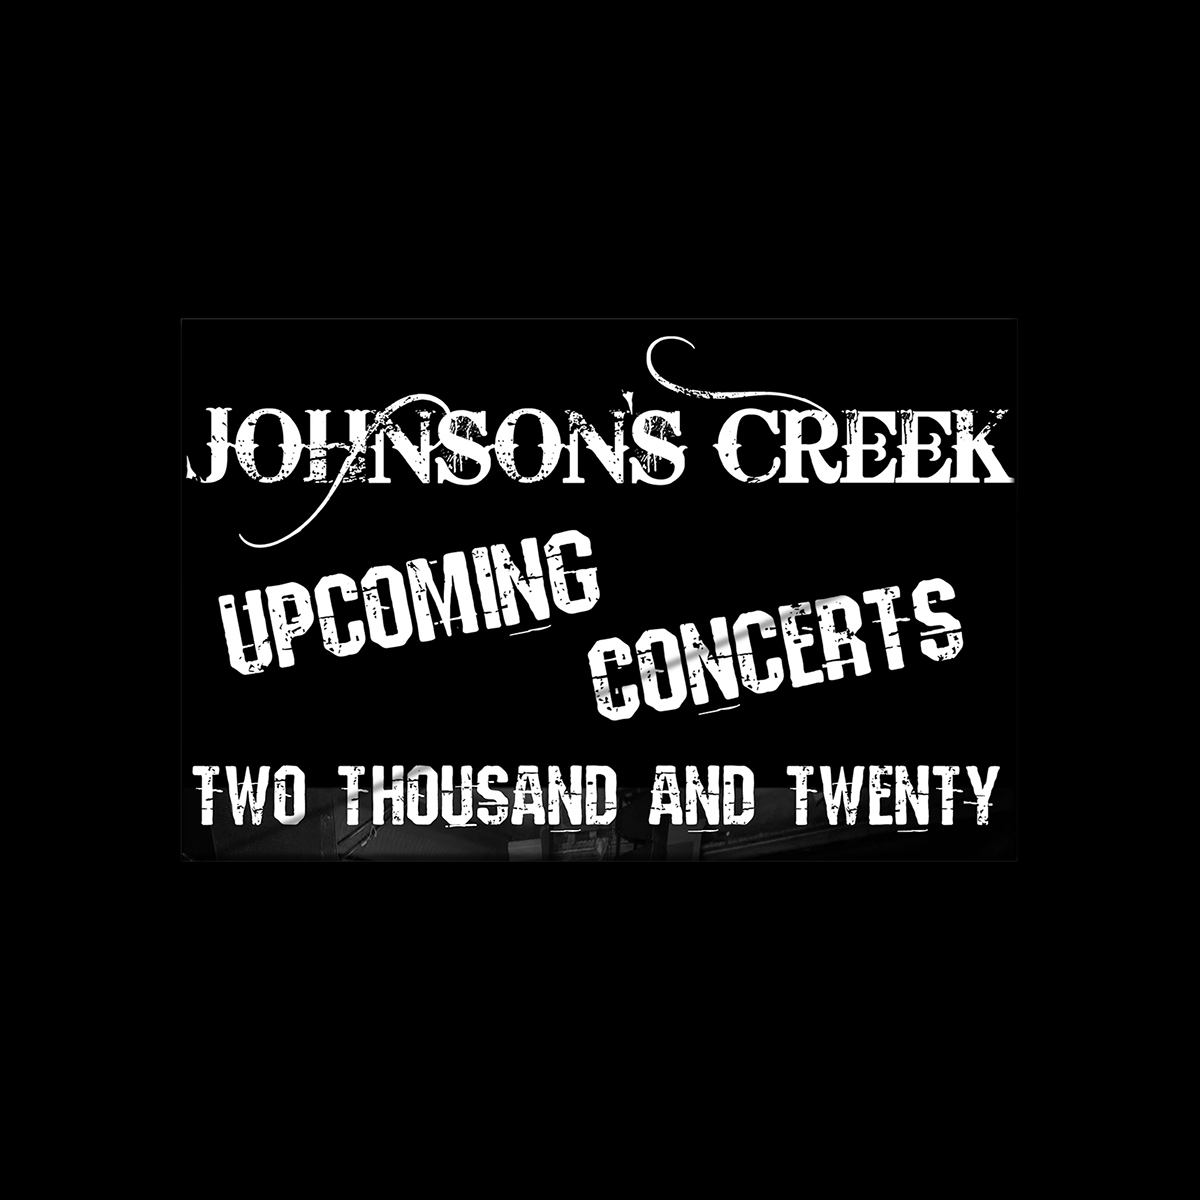 Events: Johnson’s Creek Band Upcoming Concerts 2020